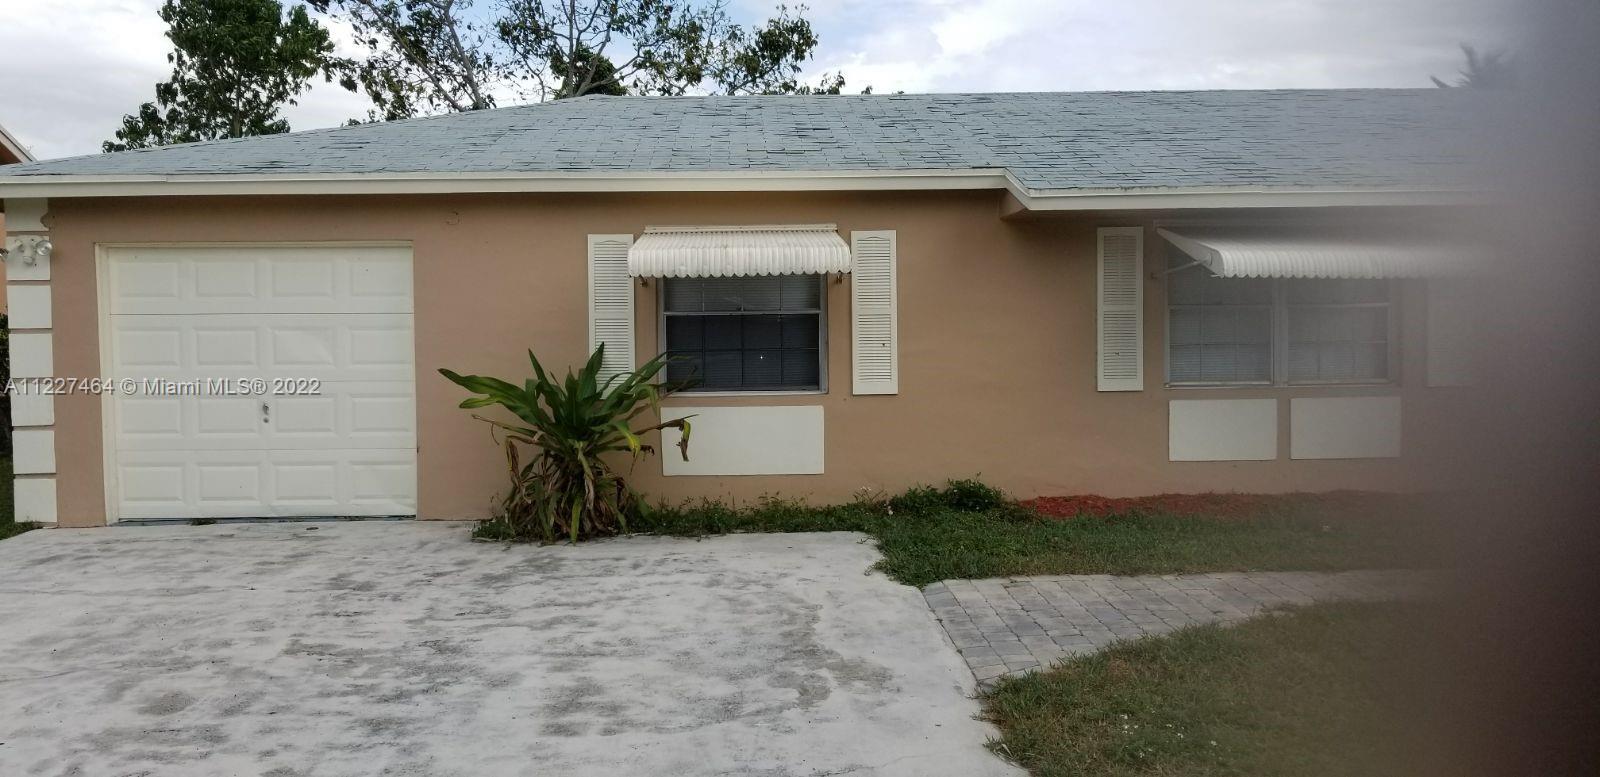 Great 3/2 Single family house. close to shopping center, easy to show, TENANT occupied $2200/month. 